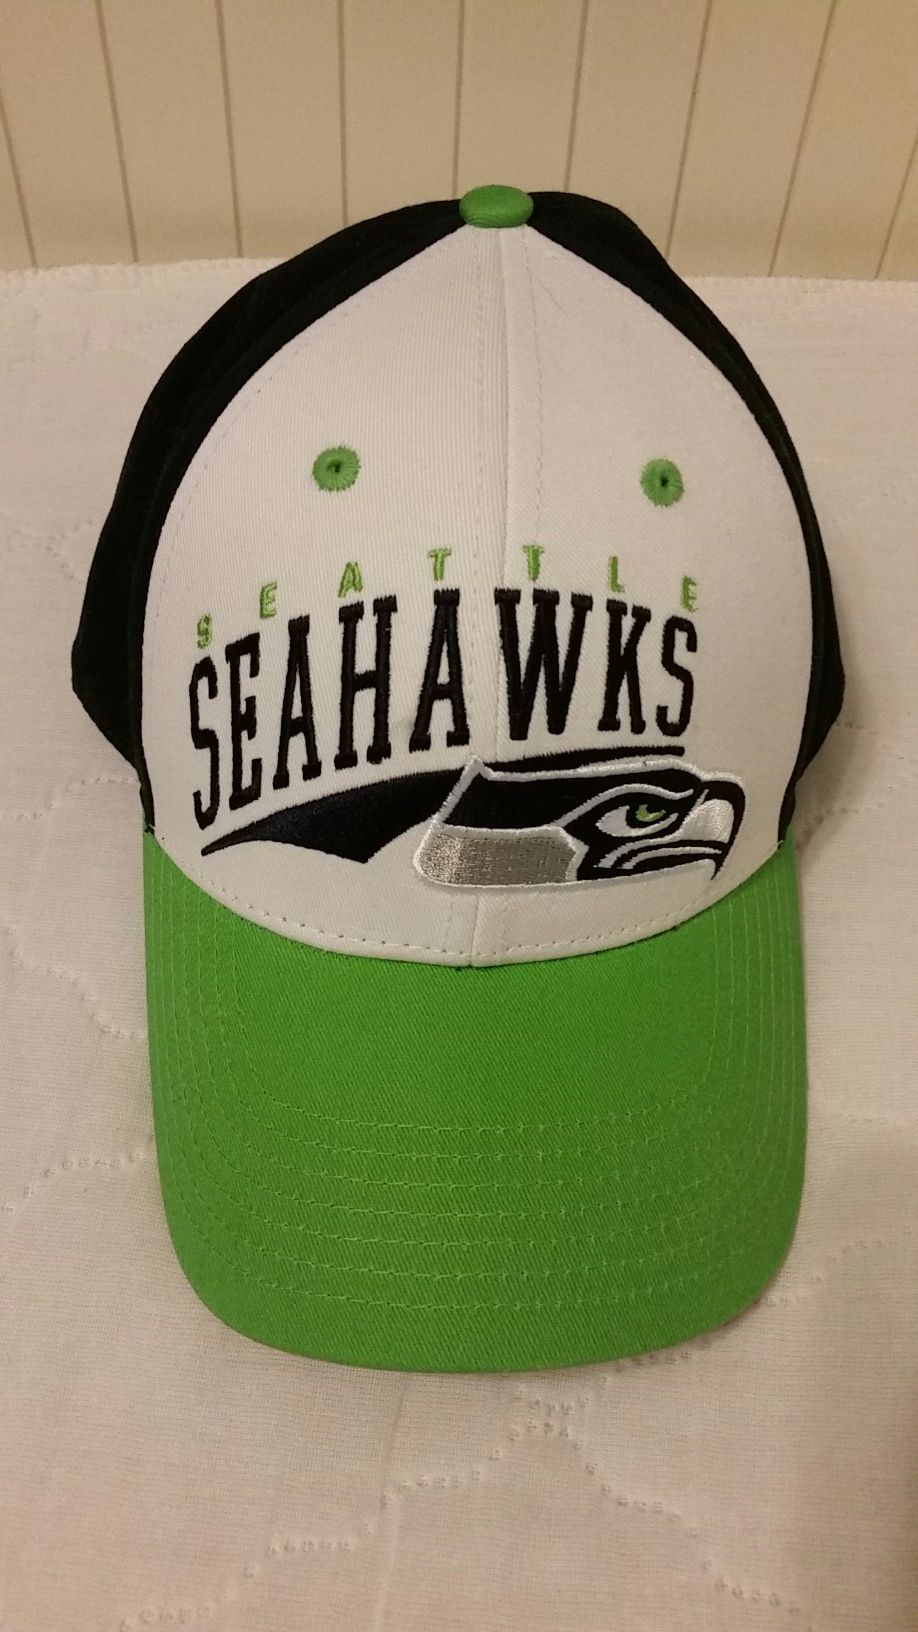 Seattle Seahawks youth ball cap for Sale in Goodyear, AZ - OfferUp